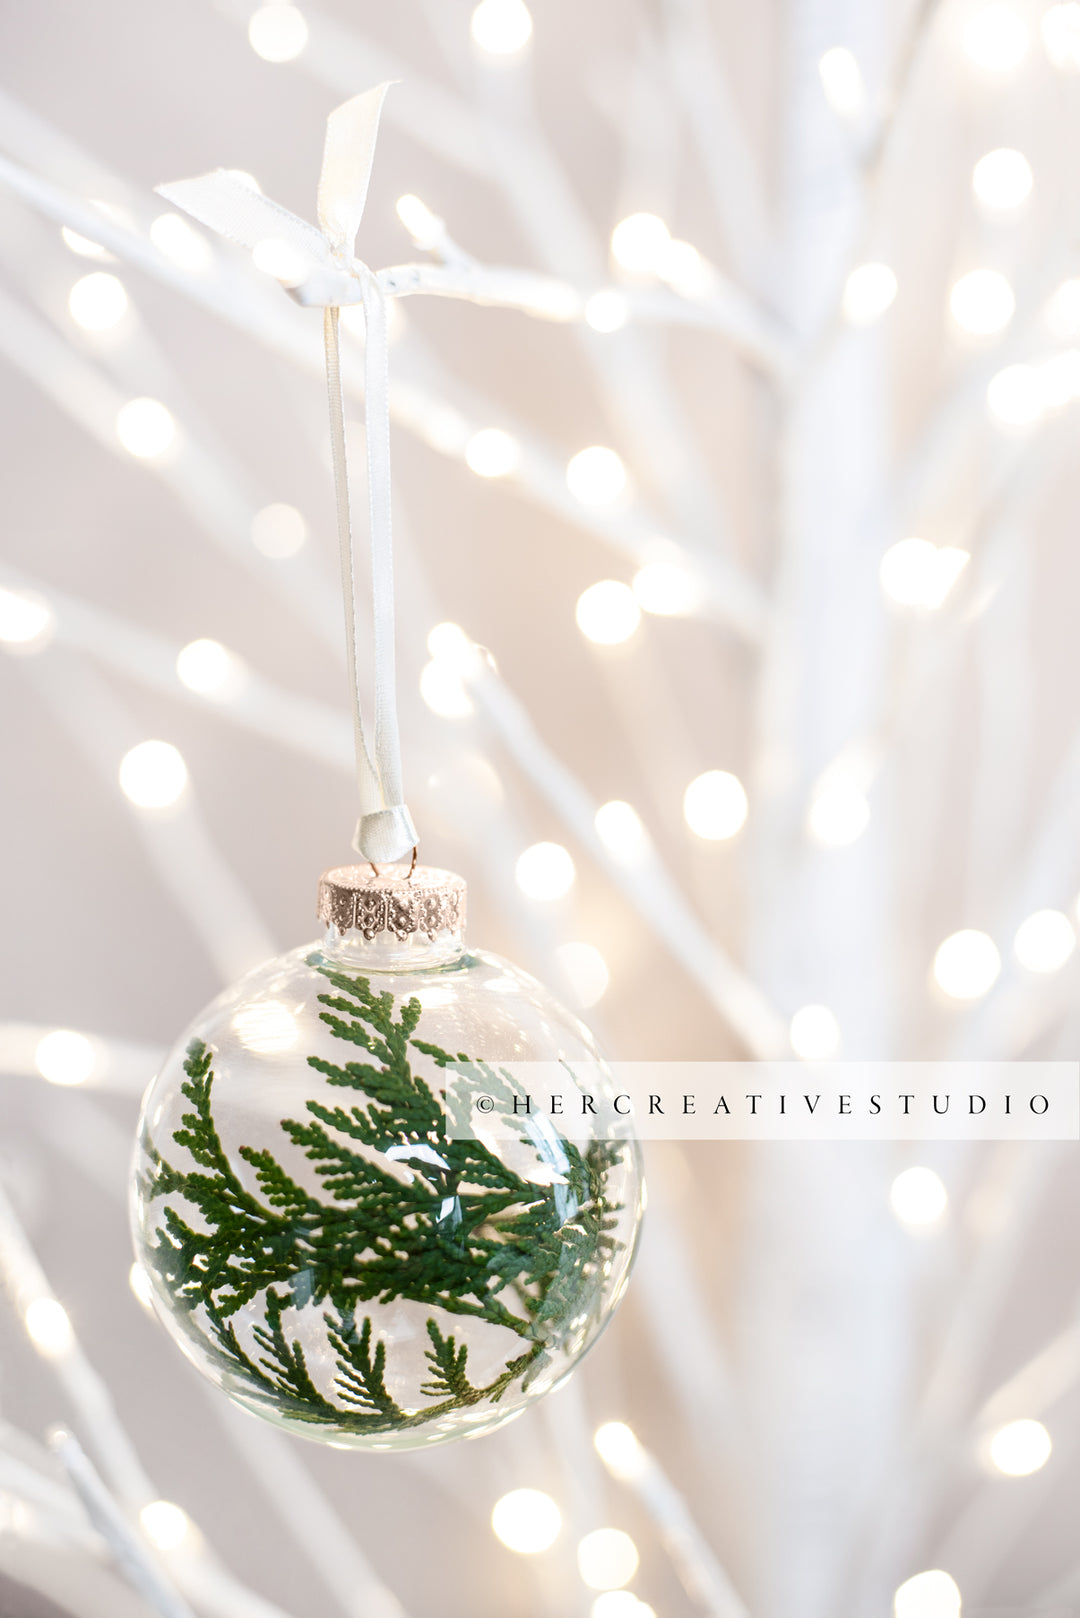 Clear Ornament with Green Trimmings on Tree, Styled Image